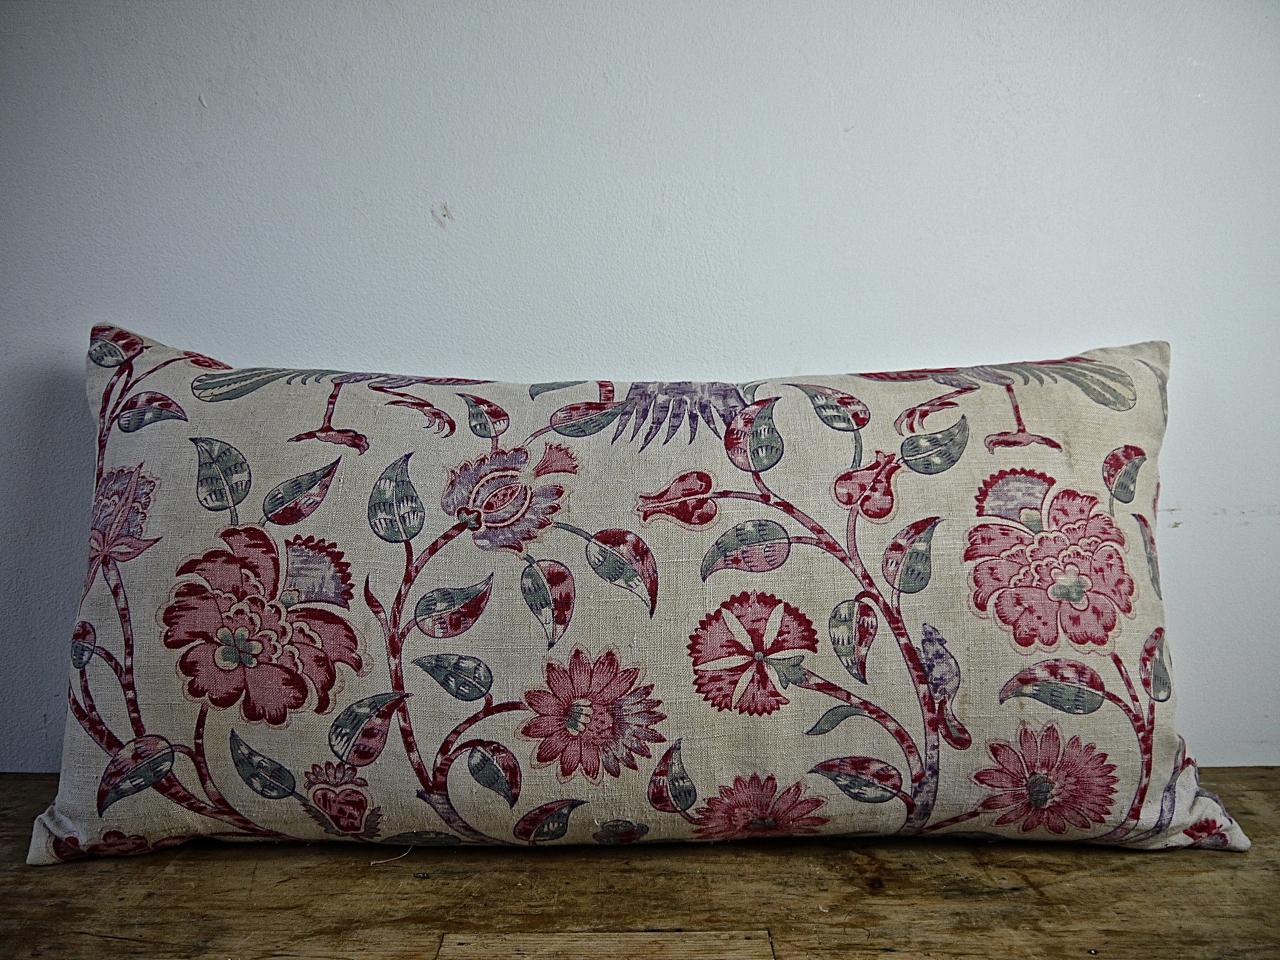 Pair of French late 19th century linen cushions printed with a large scale design of pink, red and pale mauve stylized flowers on arching branches and leaves with an glimpse of two exotic birds. Backed in a natural dye French linen and slip-stitched